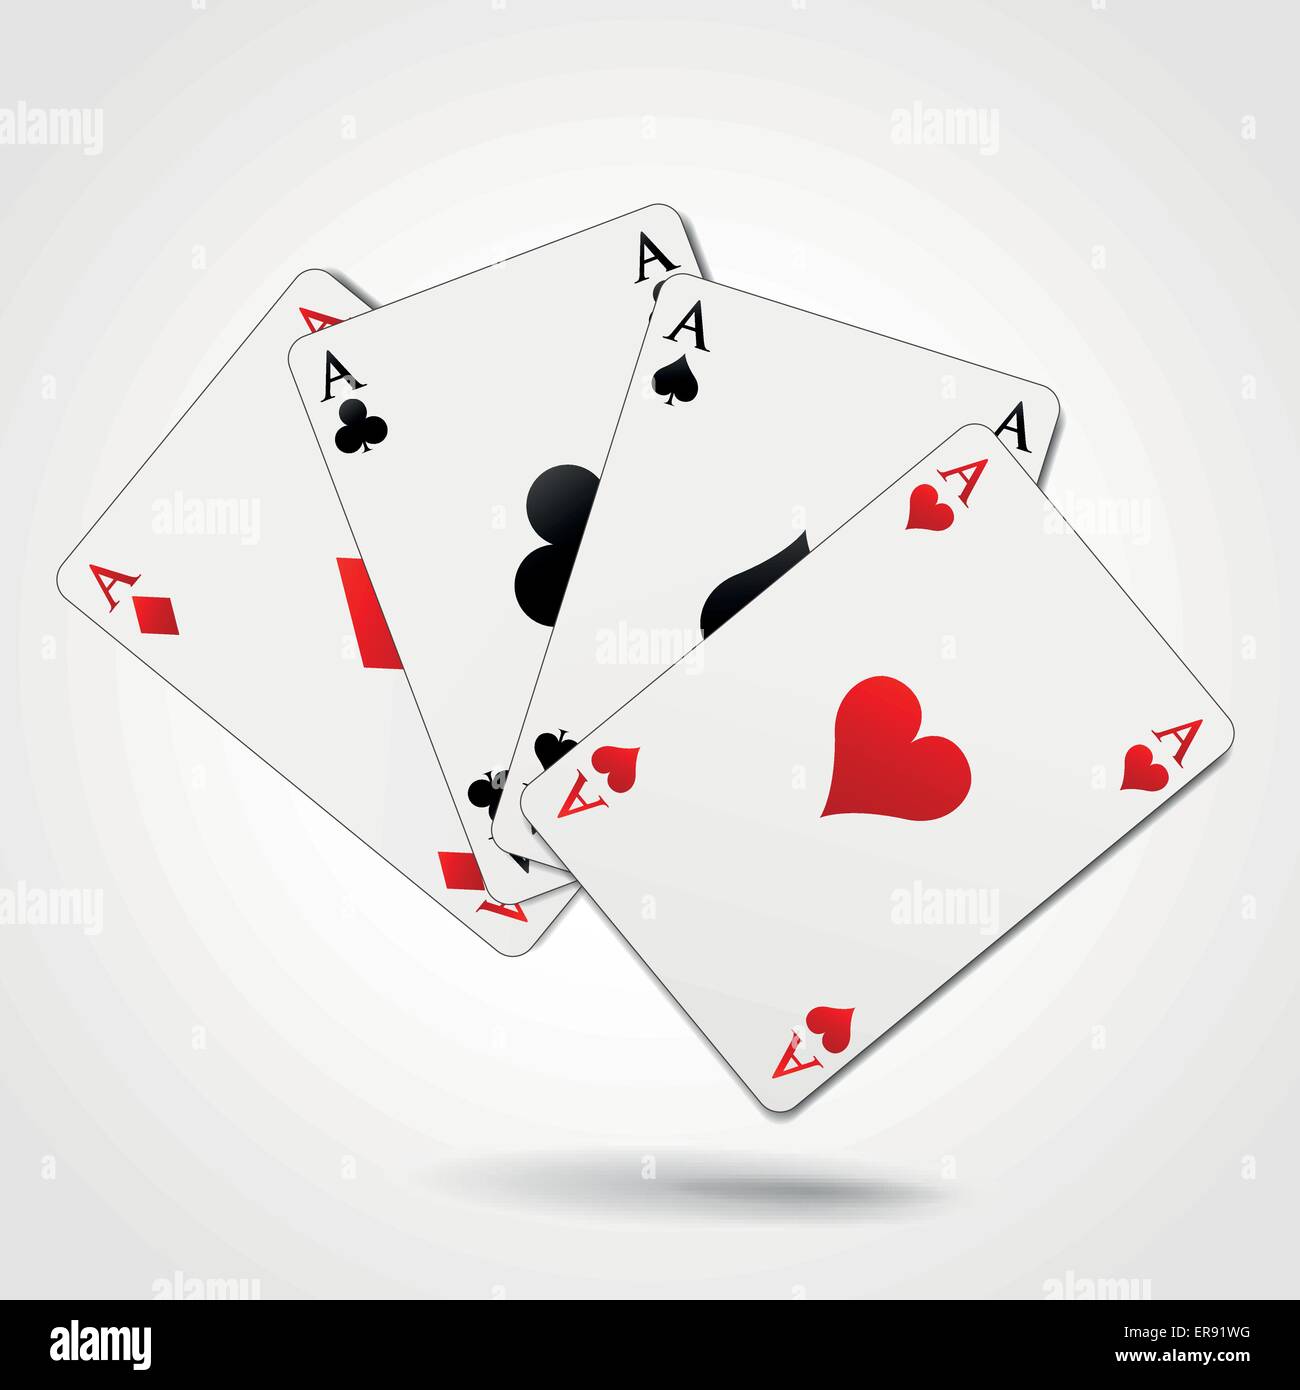 Vector illustration of four aces playing cards Stock Vector